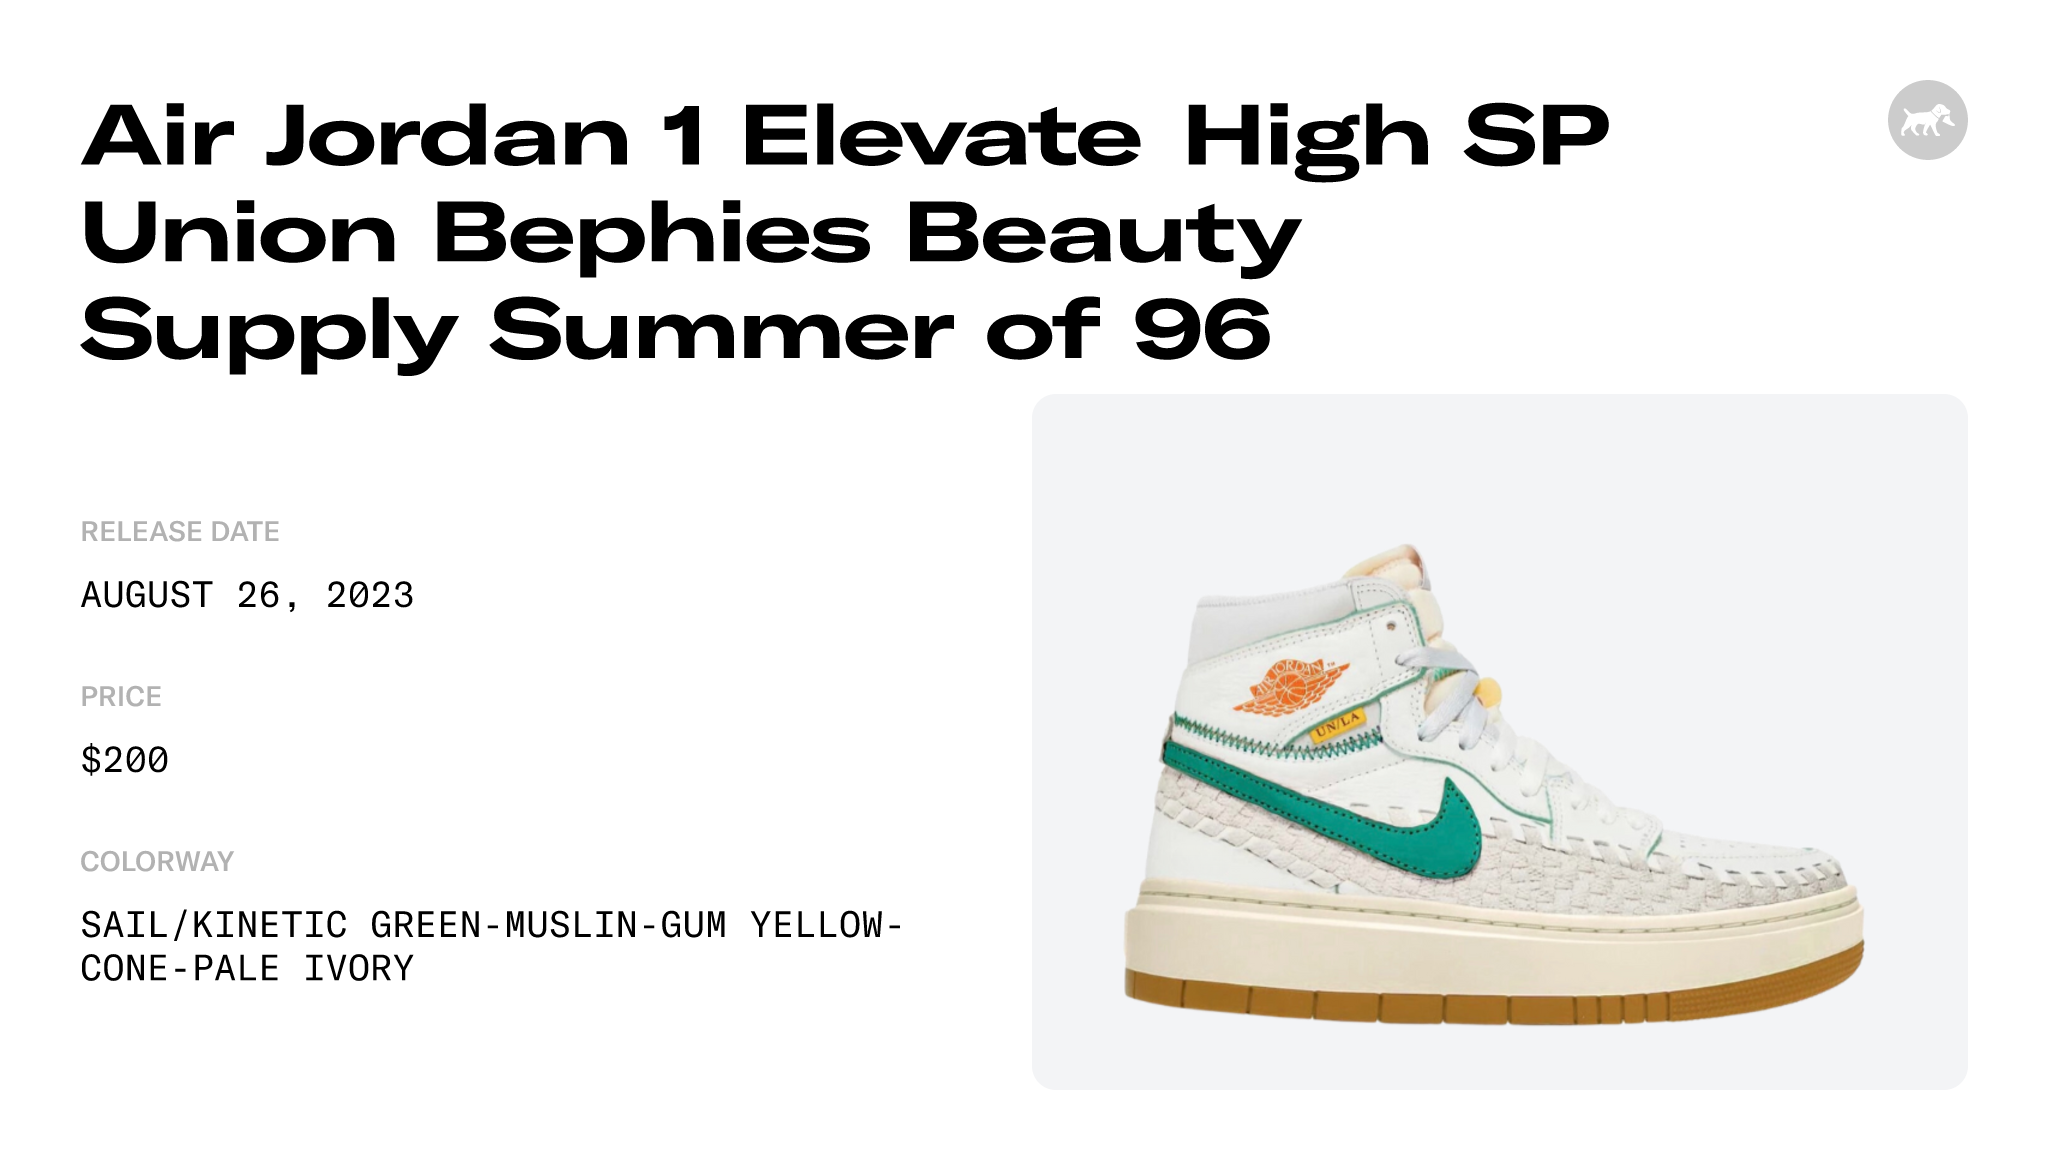 Air Jordan 1 Elevate High SP Union Bephies Beauty Supply Summer of